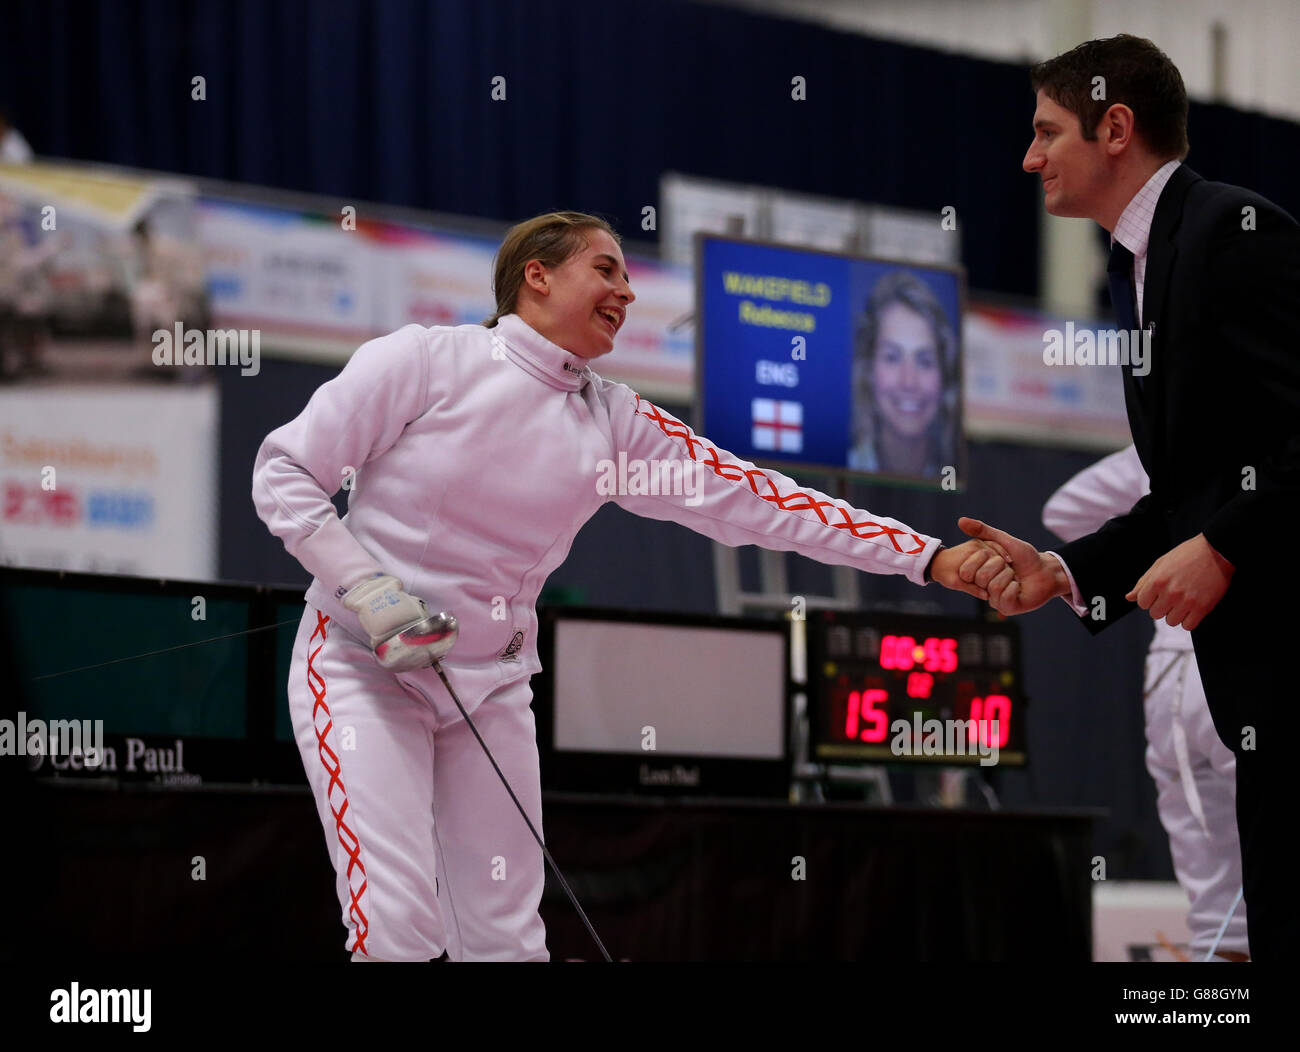 England's Danielle Lawson celebrates winning the Women's Epee Final at the Fencing during the Sainsbury's 2015 School Games in Manchester. PRESS ASSOCIATION Photo. Picture date: Saturday September 5, 2015. Photo credit should read: Steven Paston/PA Wire Stock Photo